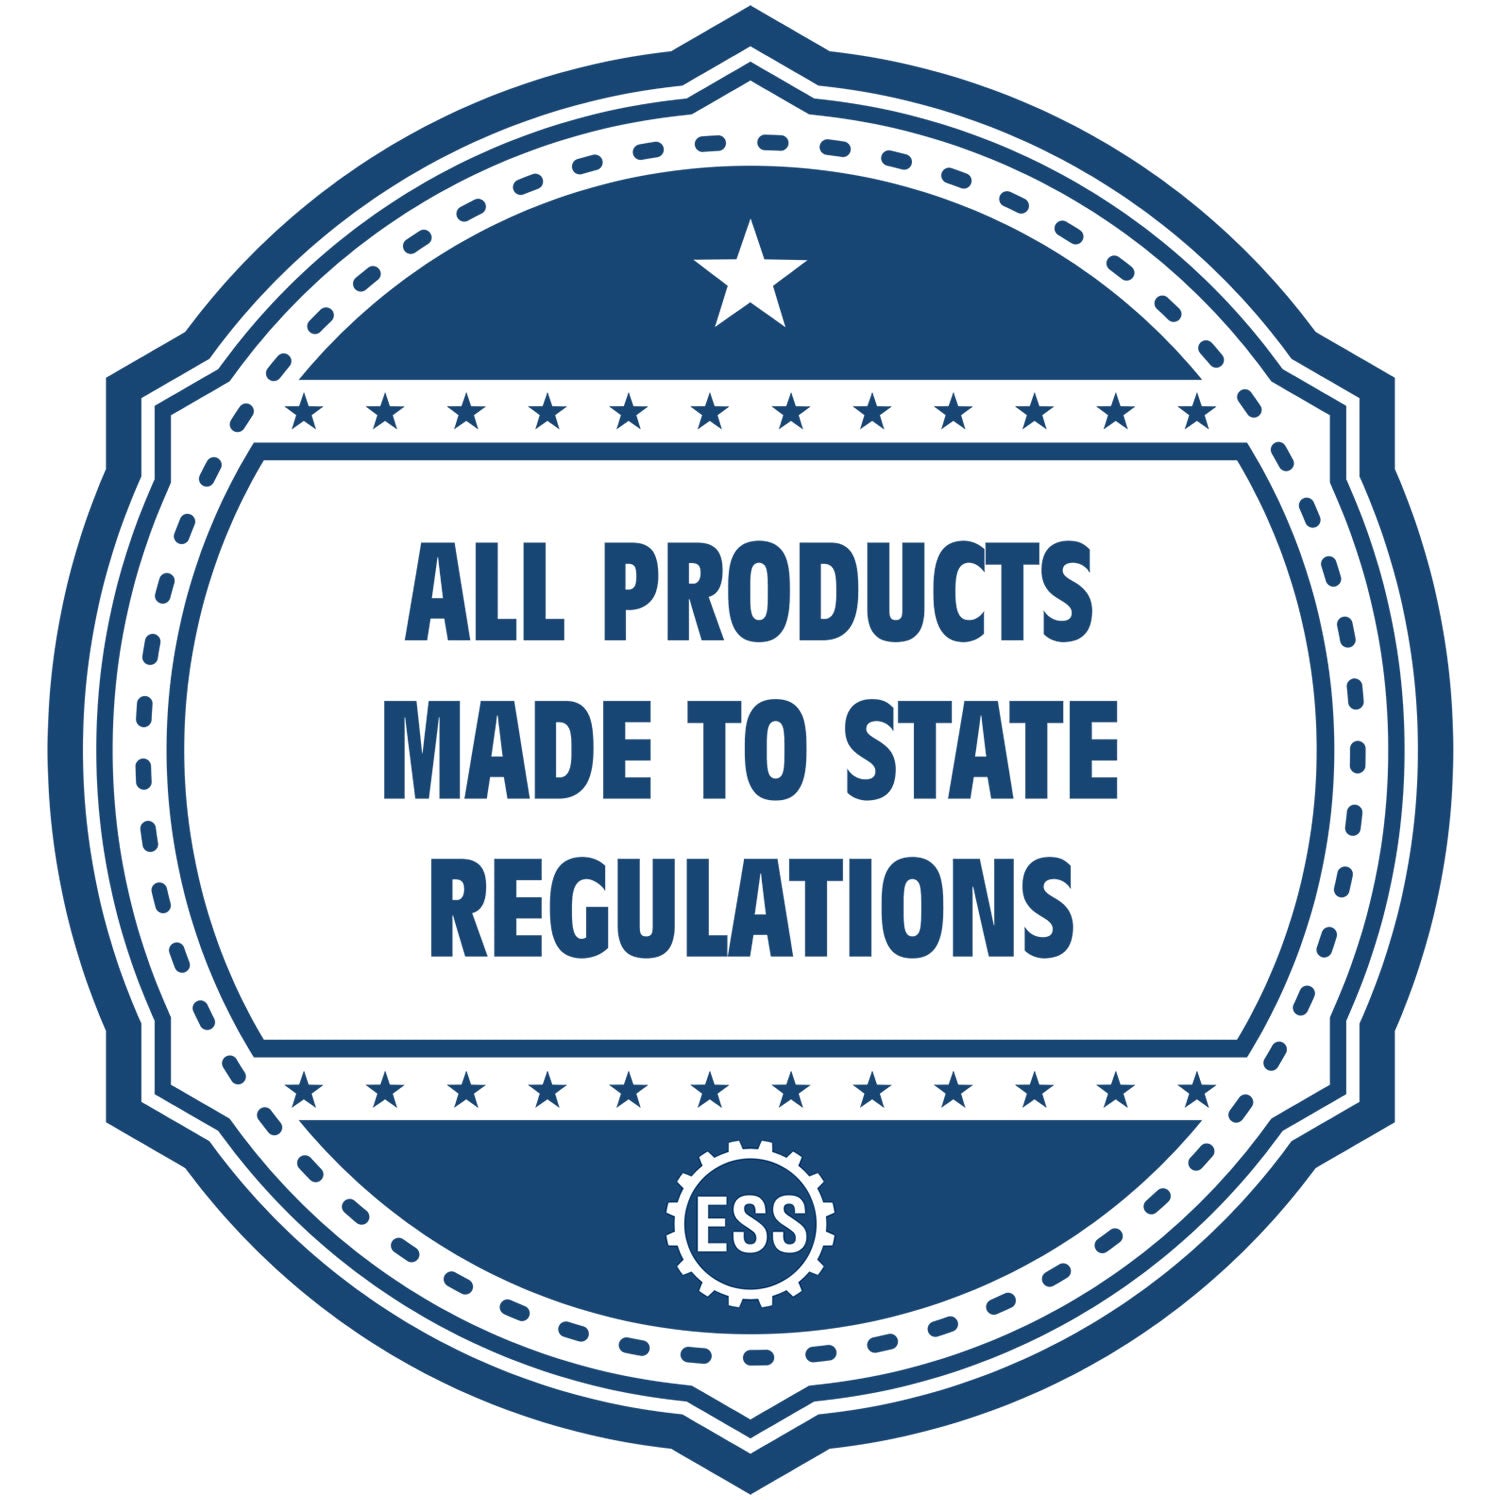 An icon or badge element for the Soft Puerto Rico Professional Engineer Seal showing that this product is made in compliance with state regulations.